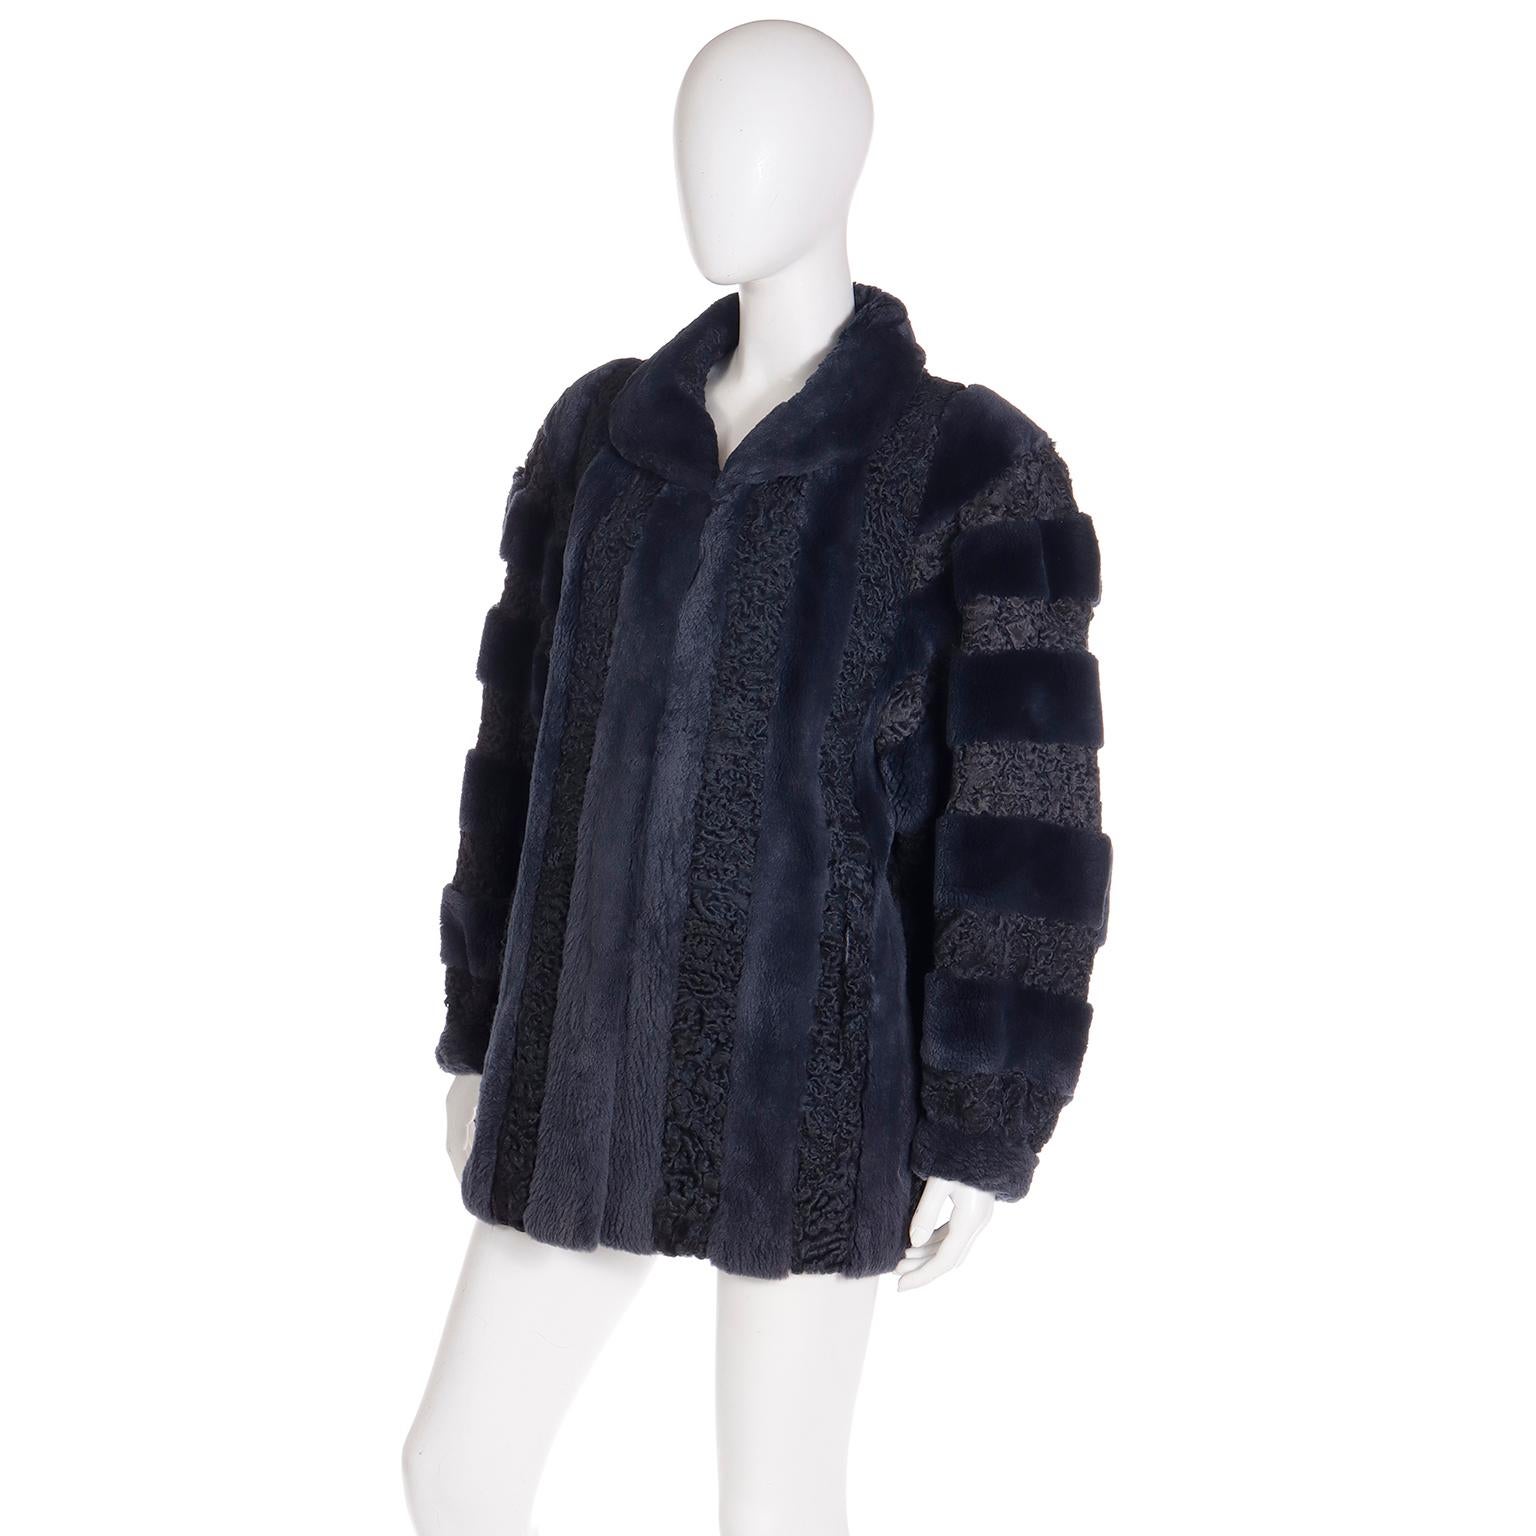 Christian Dior Fourrure 1980s Vintage Blue Dyed Sheared Fur & Lambswool Jacket For Sale 4